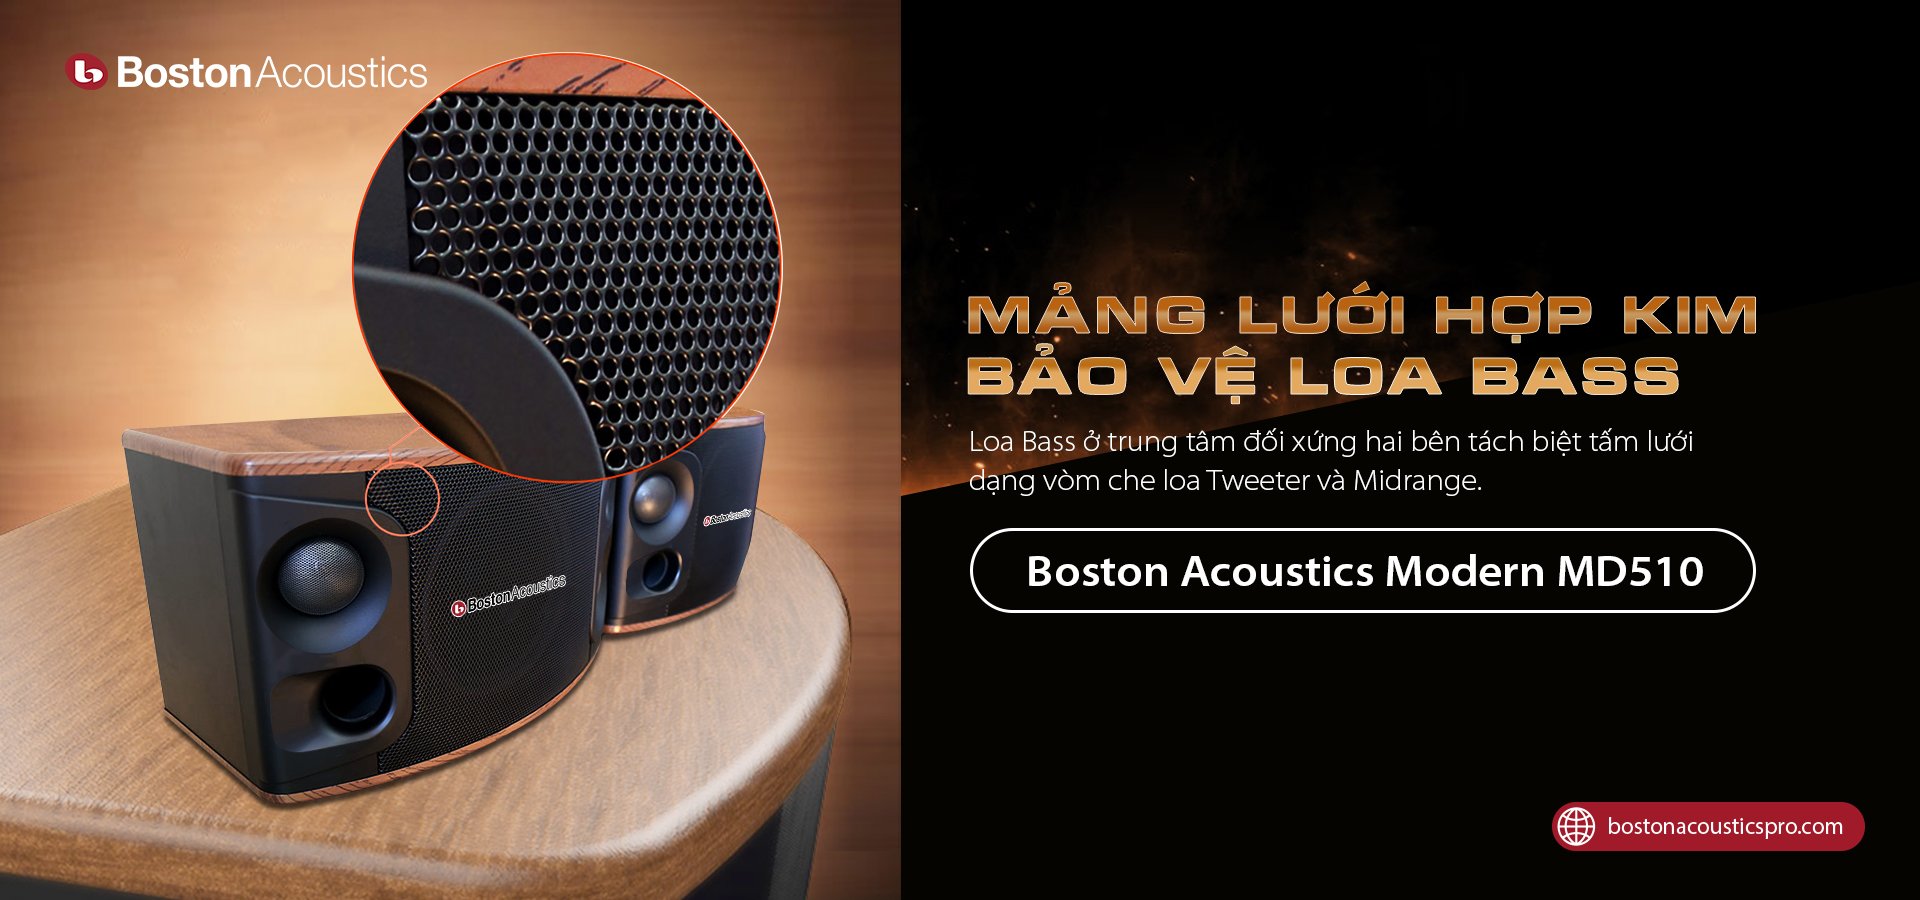 Boston Acoustics Modern MD510 | Anh Duy Audio